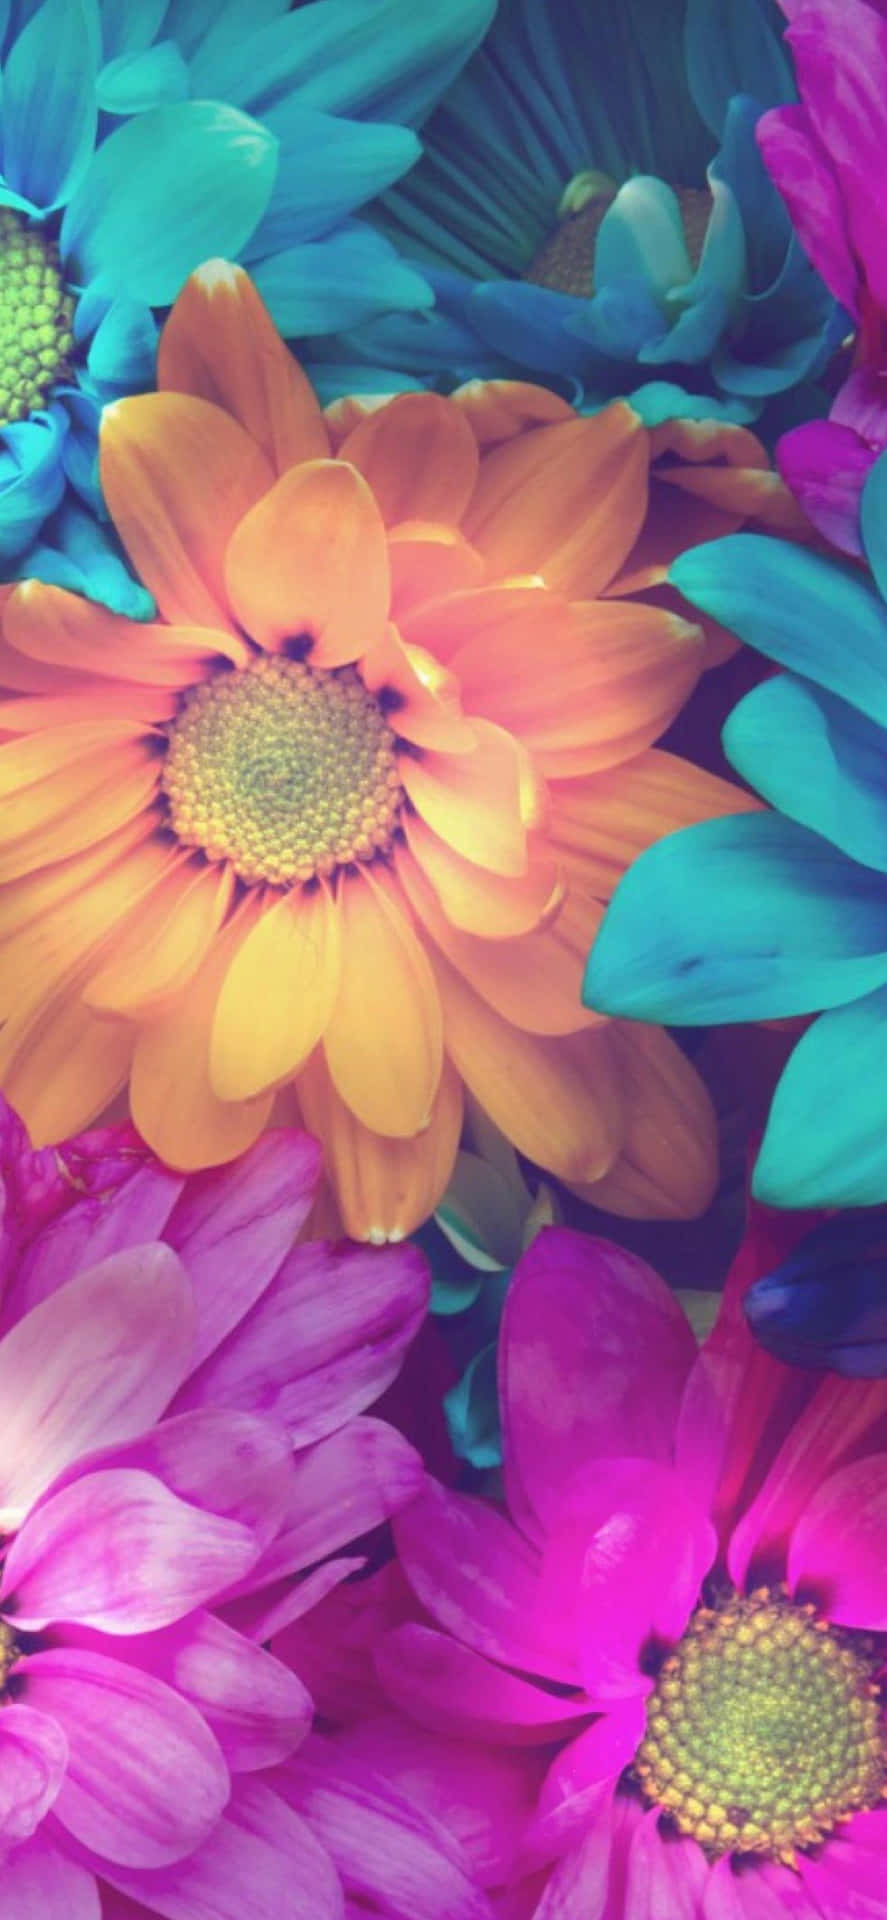 Bring a touch of beauty to your phone with this Colorful Flowers iPhone wallpaper. Wallpaper